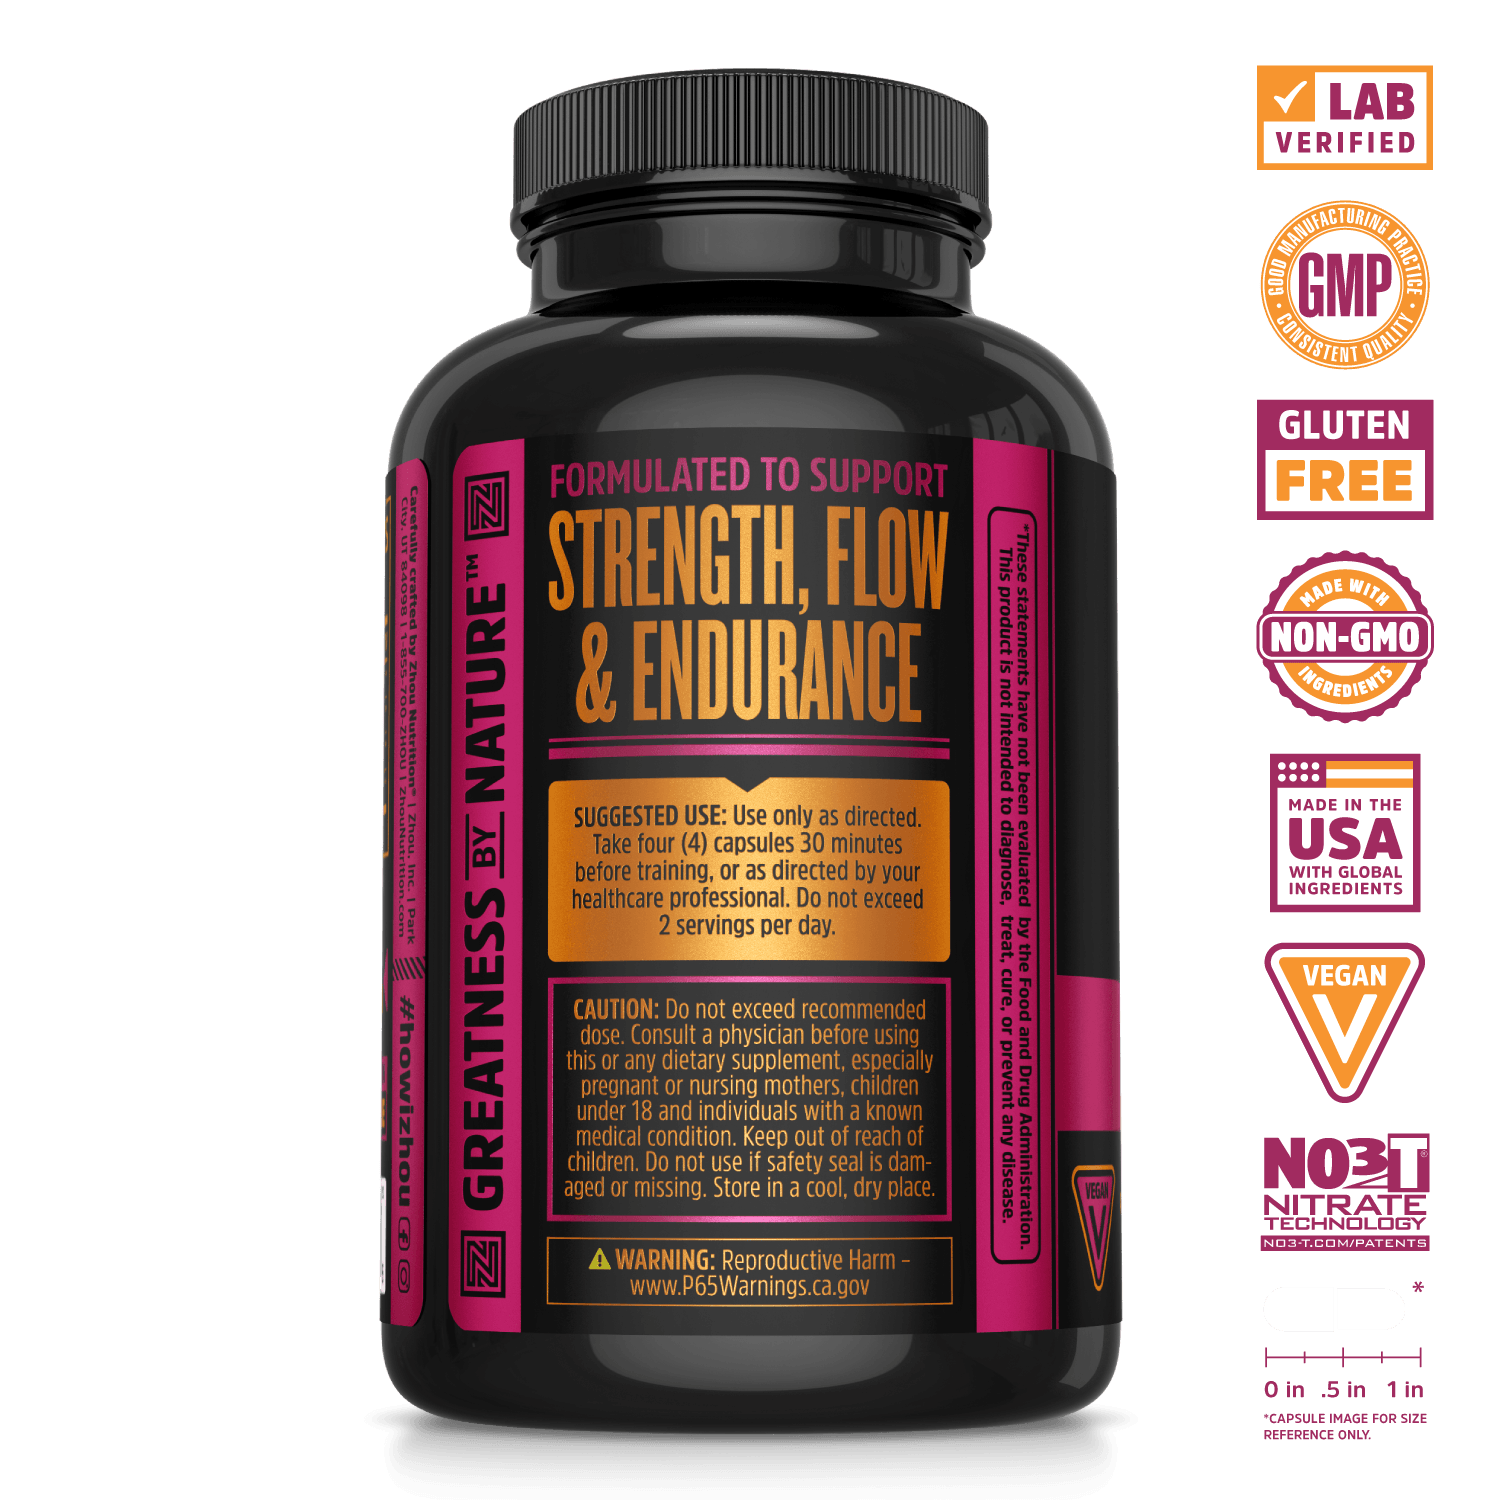 N.O. Pro Nitric Oxide Supplement Capsules. Lab verified, good manufacturing practices, made in the USA with global ingredients, made with non-GMO ingredients, gluten free, NO3T nitrate technology